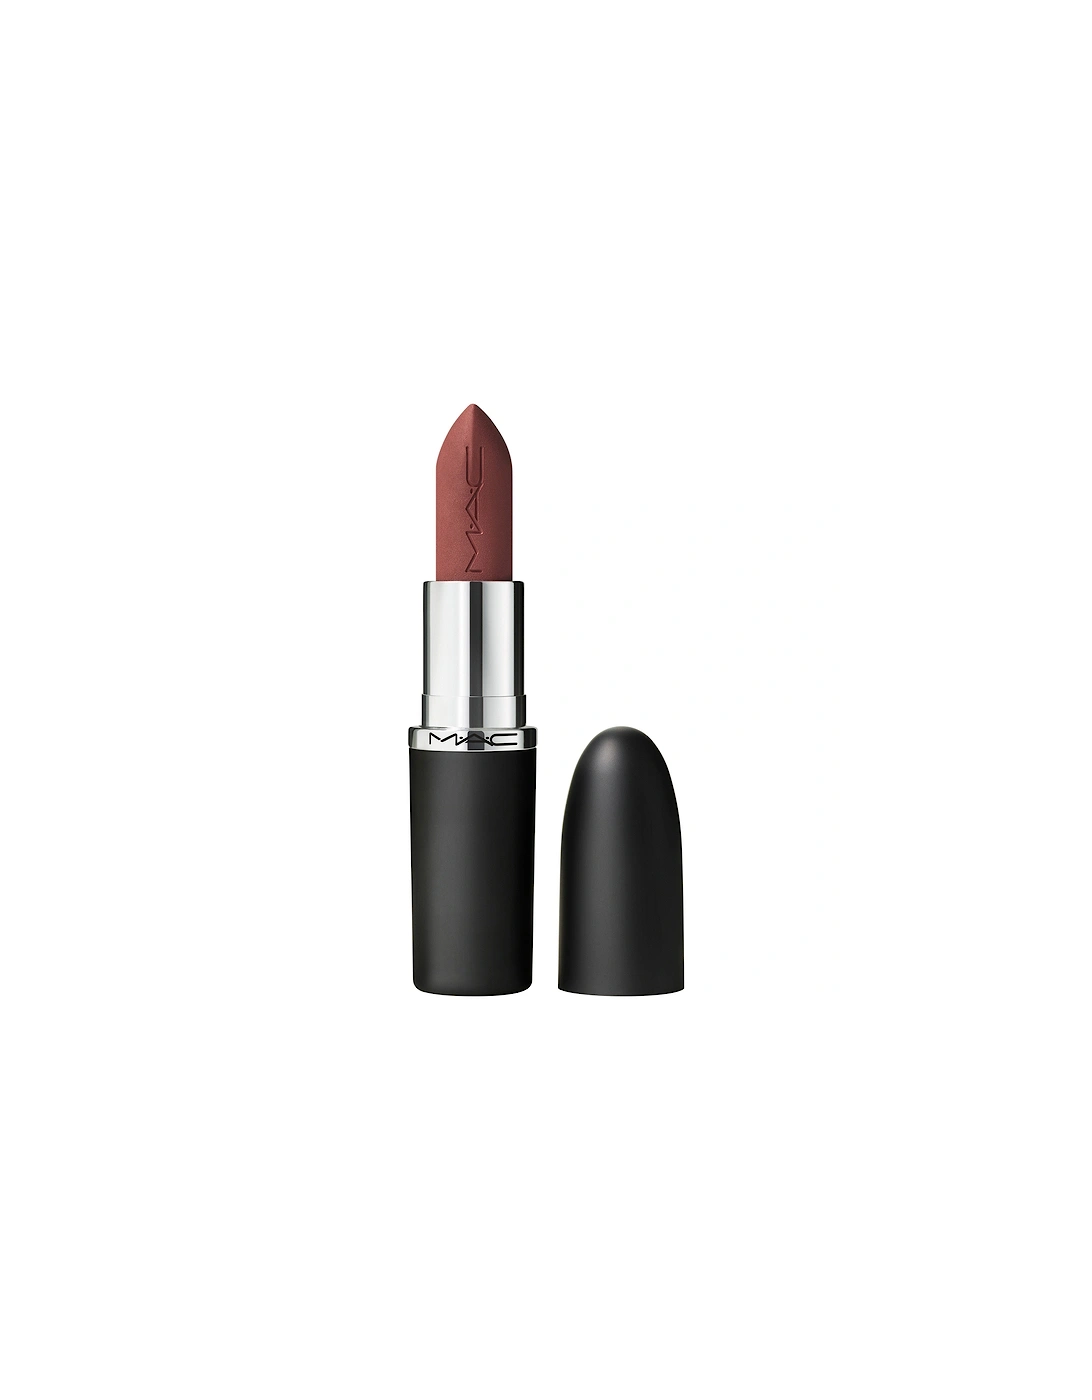 Macximal Silky Matte Lipstick - Whirl, 2 of 1